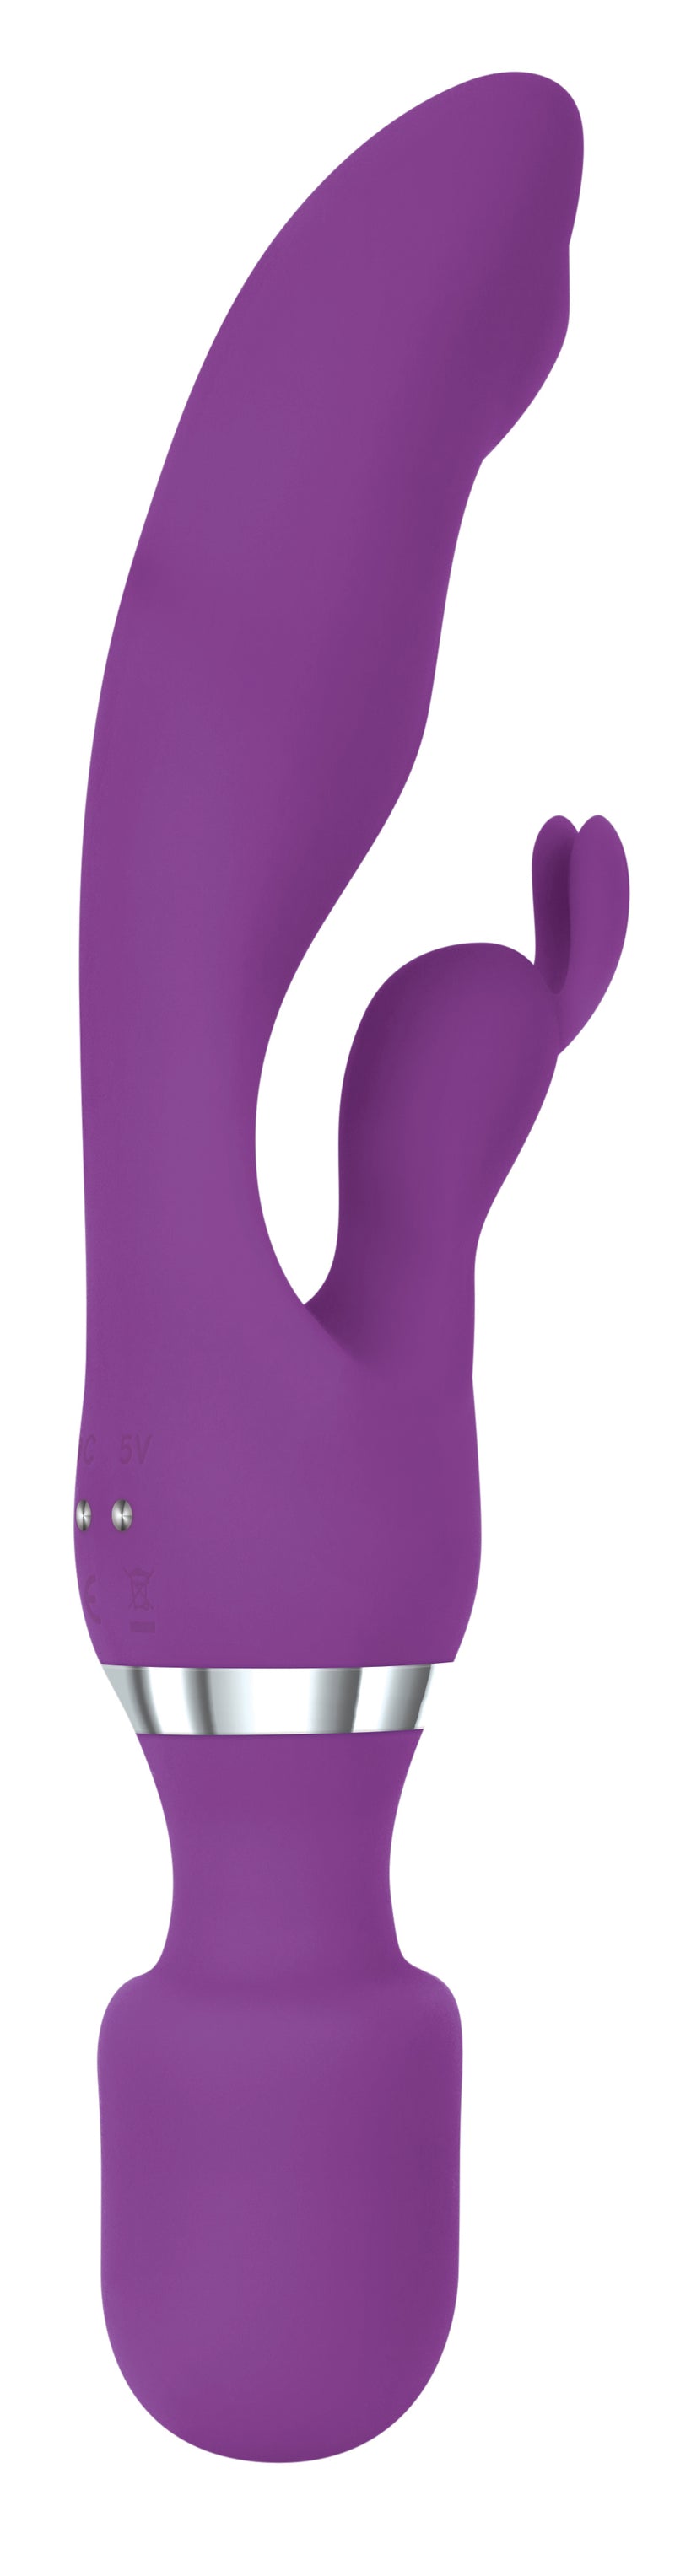 Double the Pleasure with our Rechargeable Dual-Ended Silicone Rabbit Vibe + Wand Massager